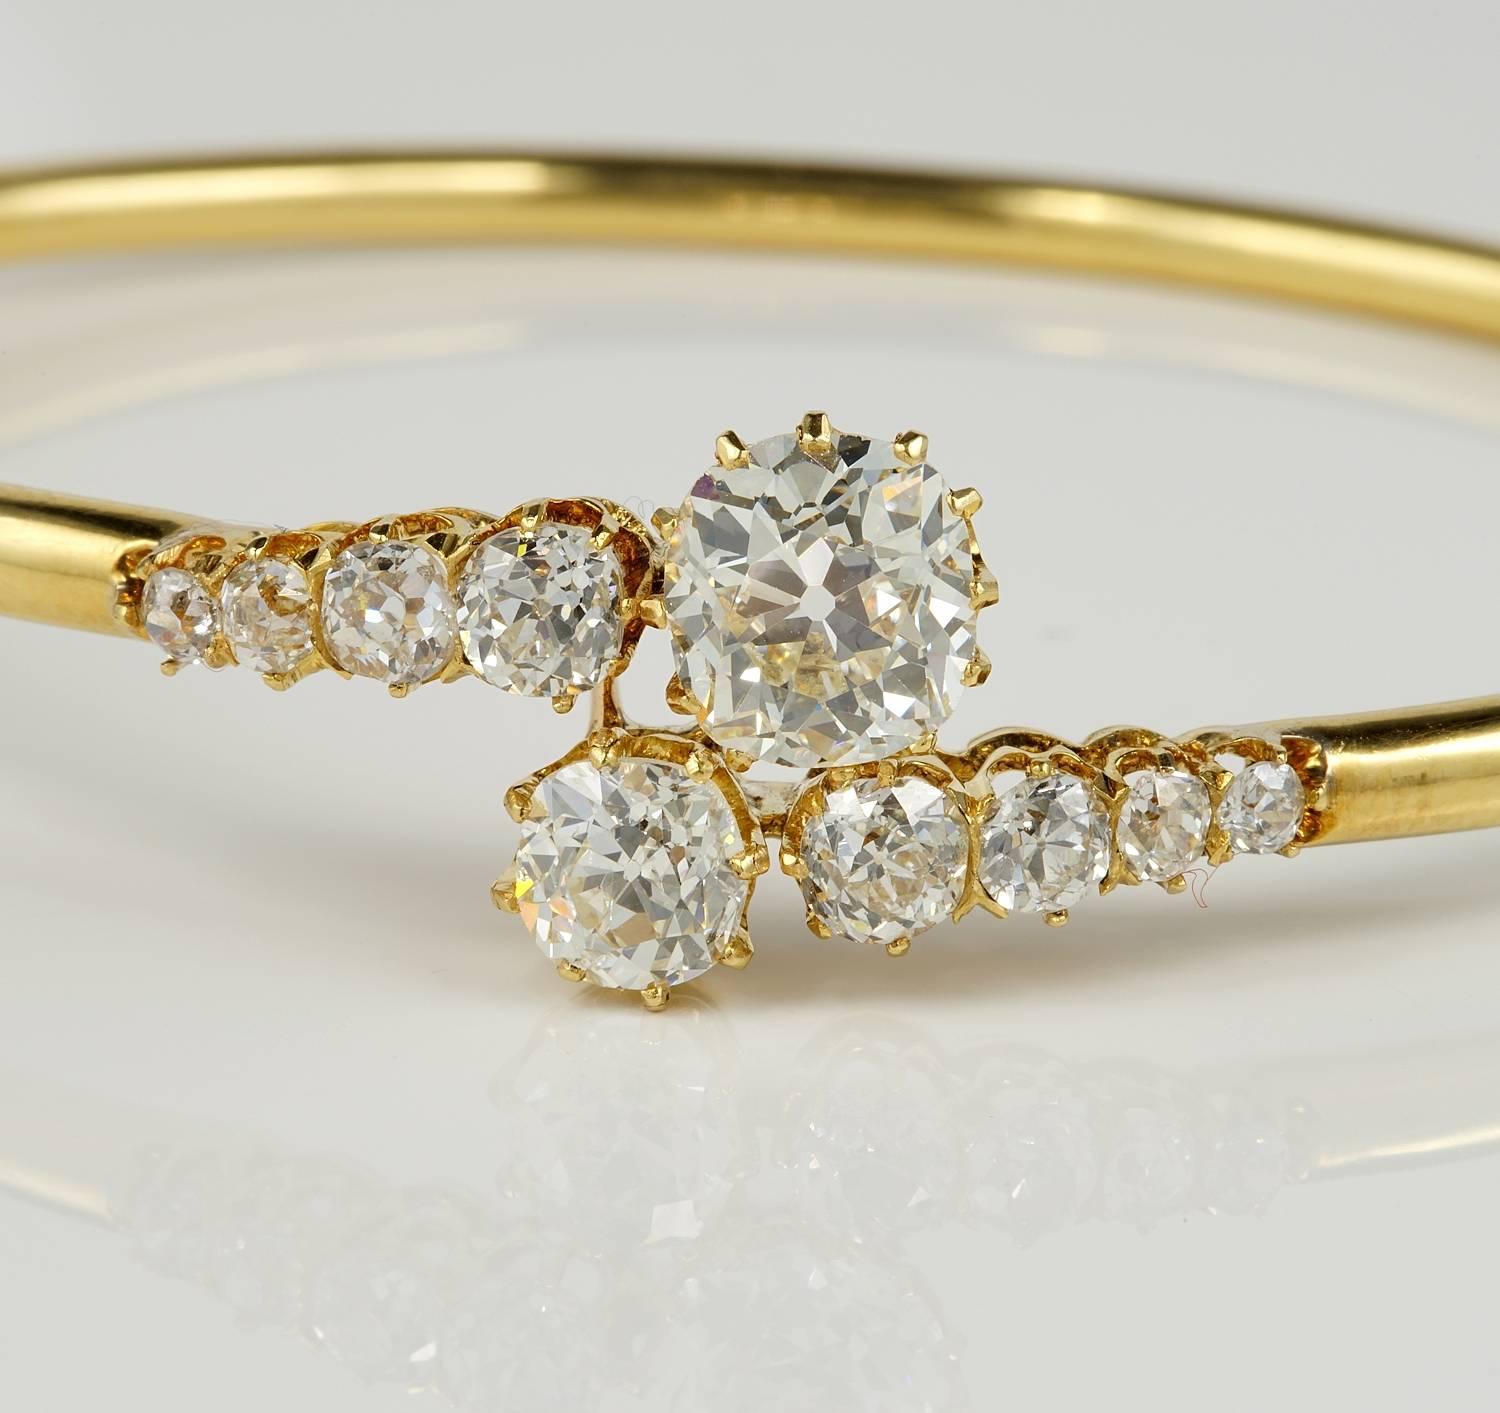 Victorian High End Bangle
A thrilling alternative to today's generic, mass-produced jewellery
This antique, very unique bangle is of timeless style, beauty and charm
Exceeding in quality, stands out for Diamond content and degree
Not easy to come